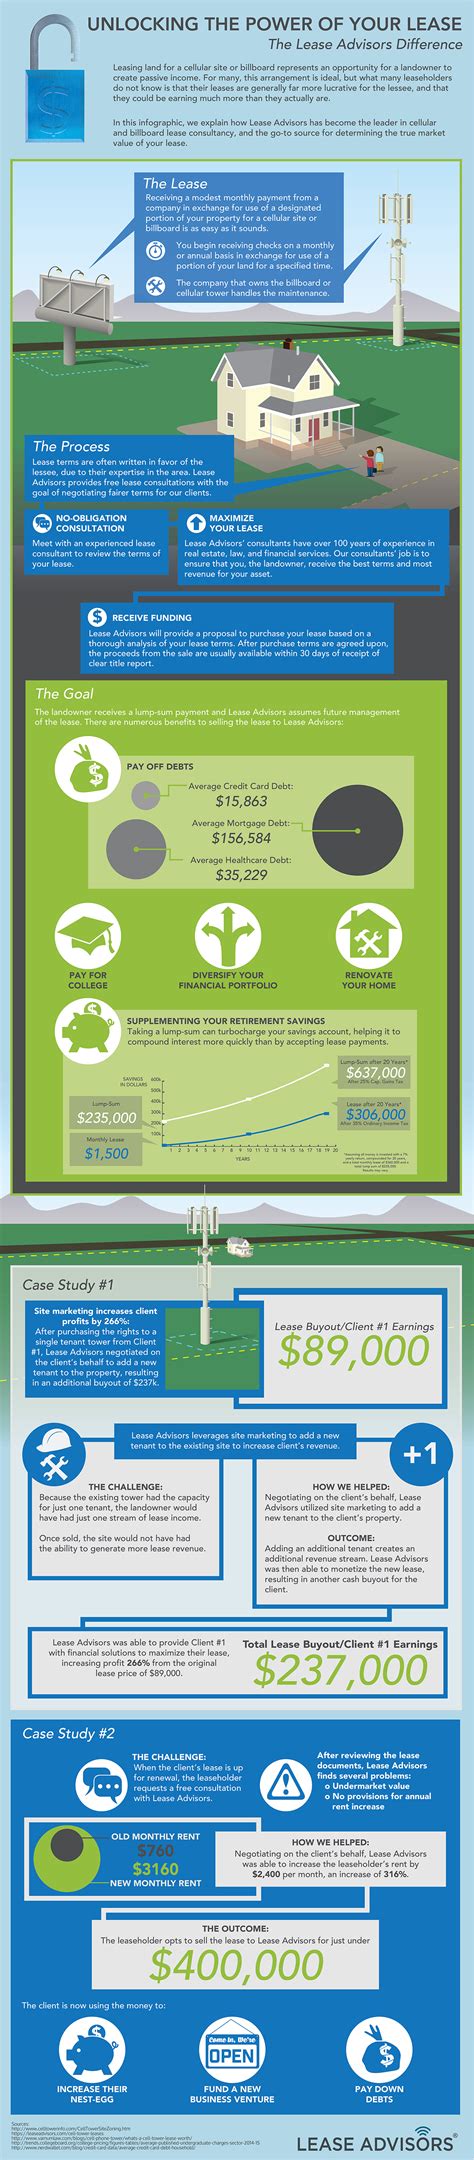 unlocking  power   lease infographic